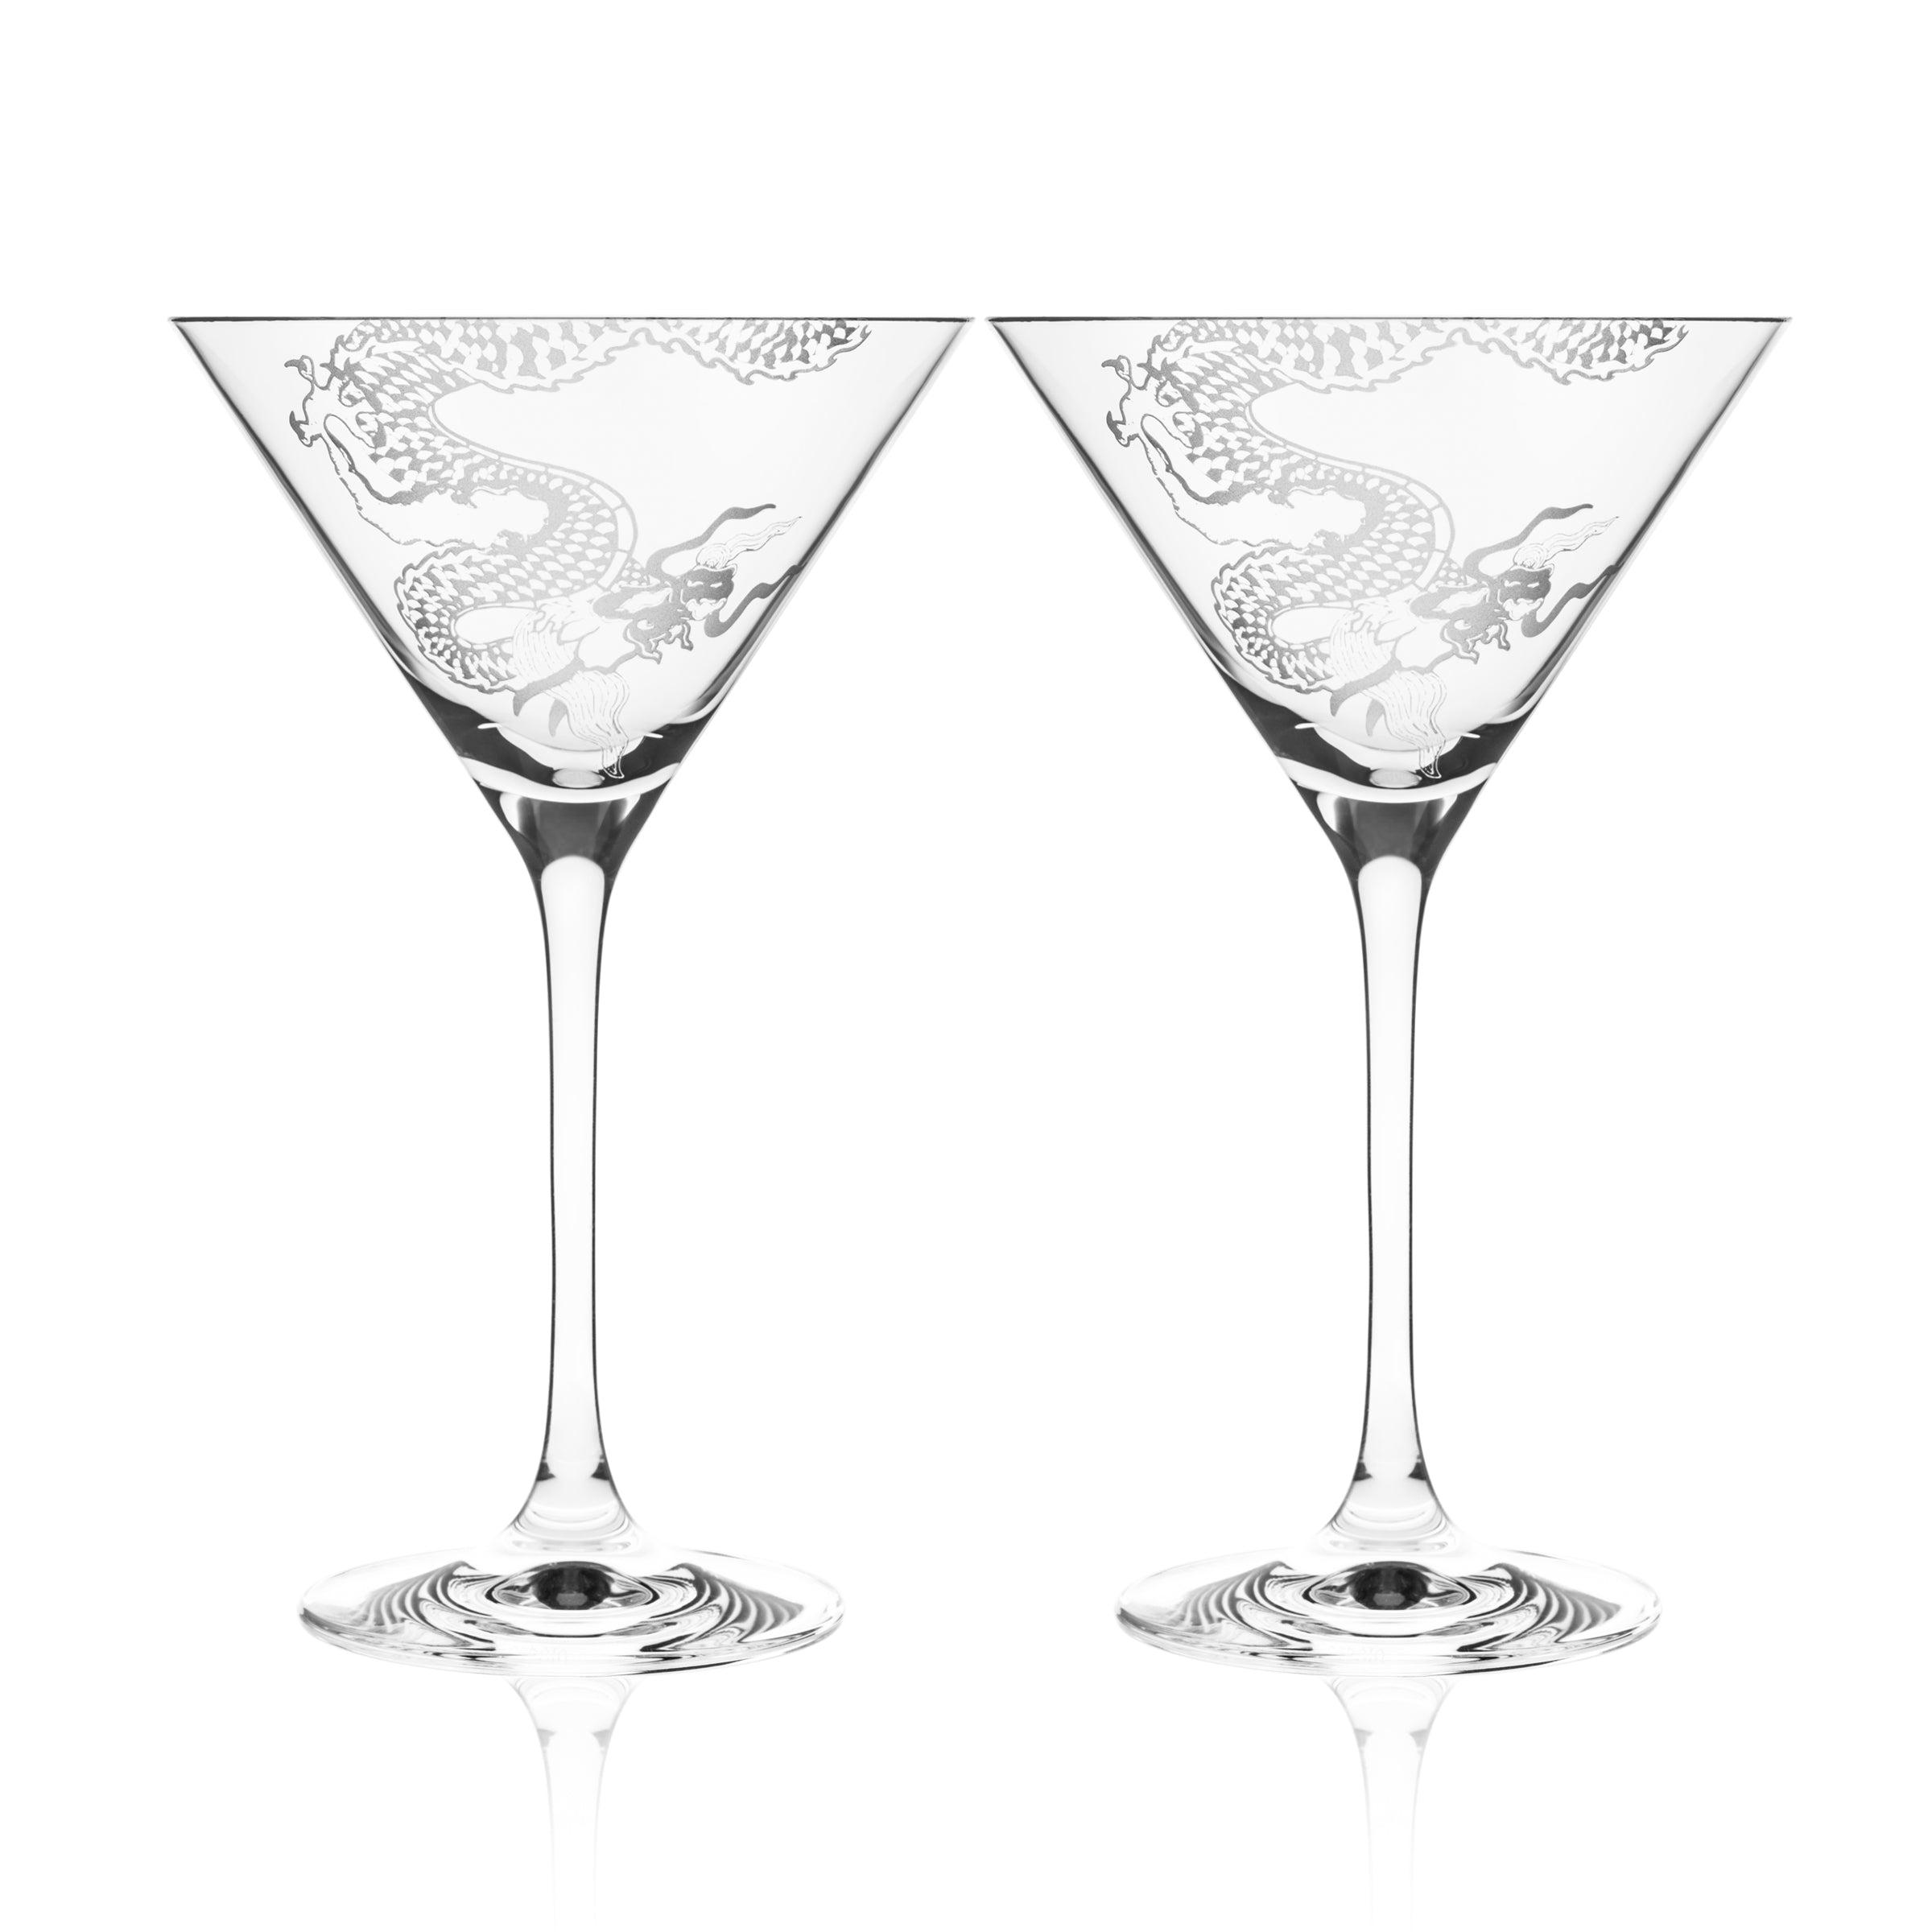 Martini Glasses Set of 12 Vintage Etched Glass Three Sizes